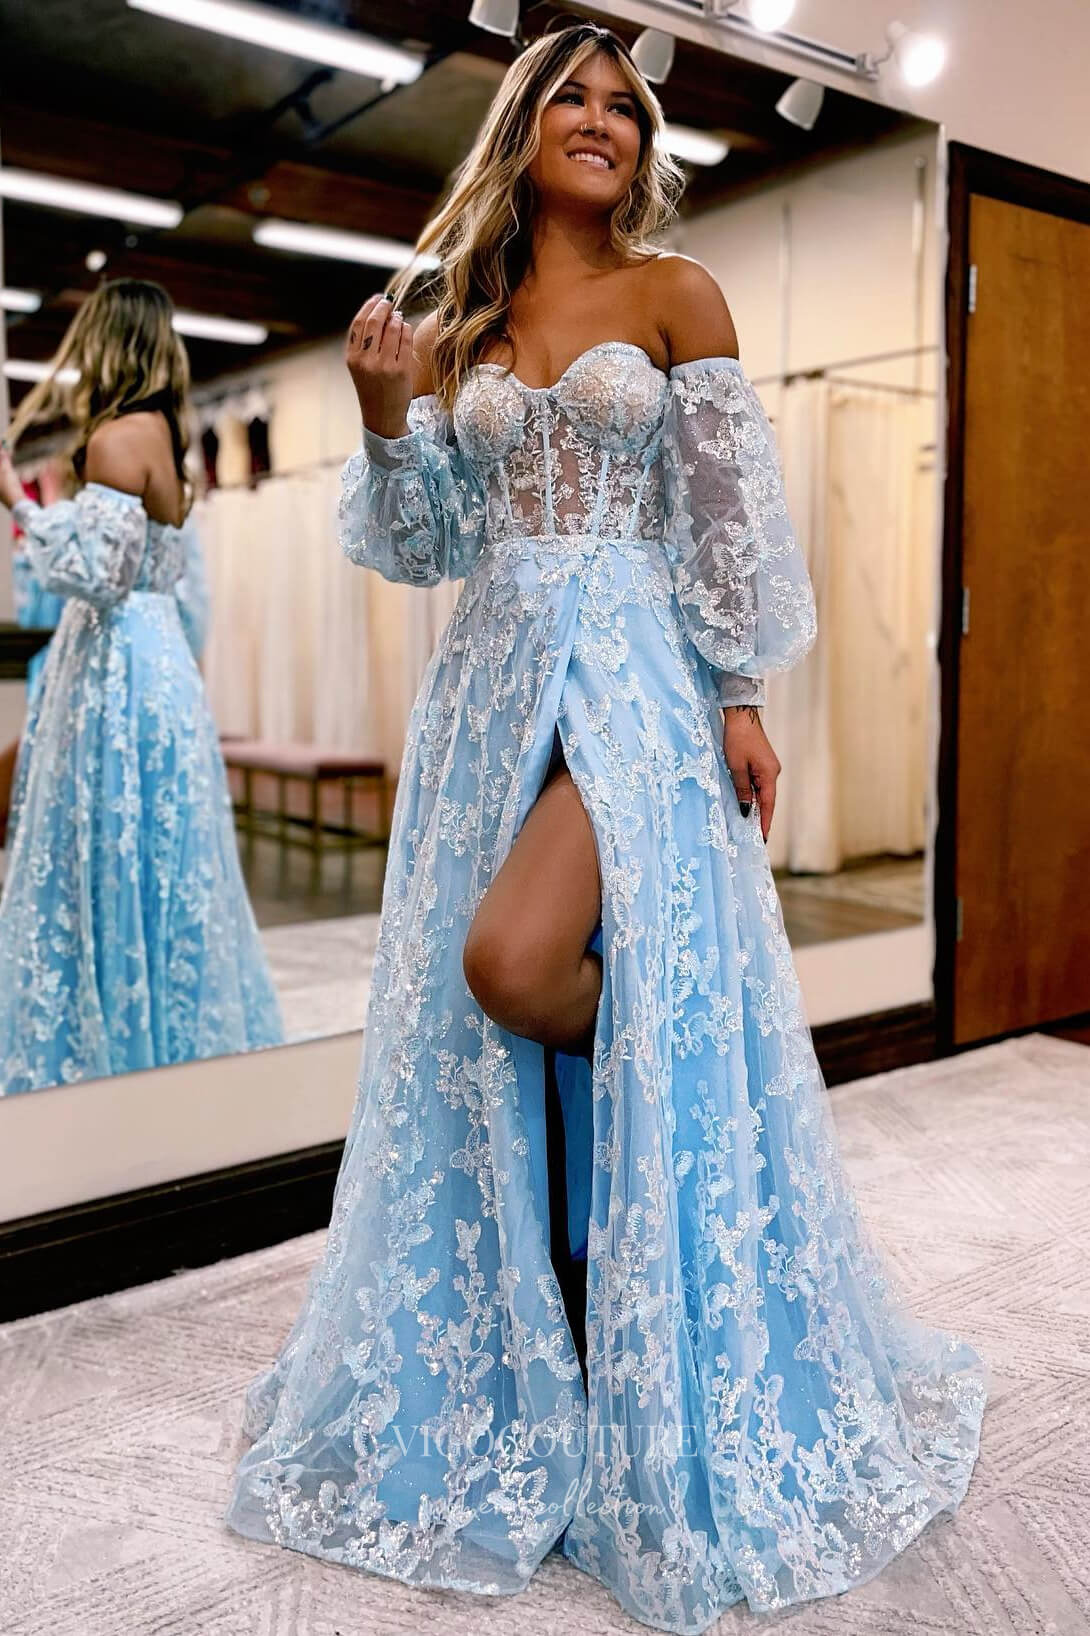 vigocouture Lace Applique Prom Dresses with Slit Removable Long Sleeve Formal Gown 21963 Light Blue / 26W